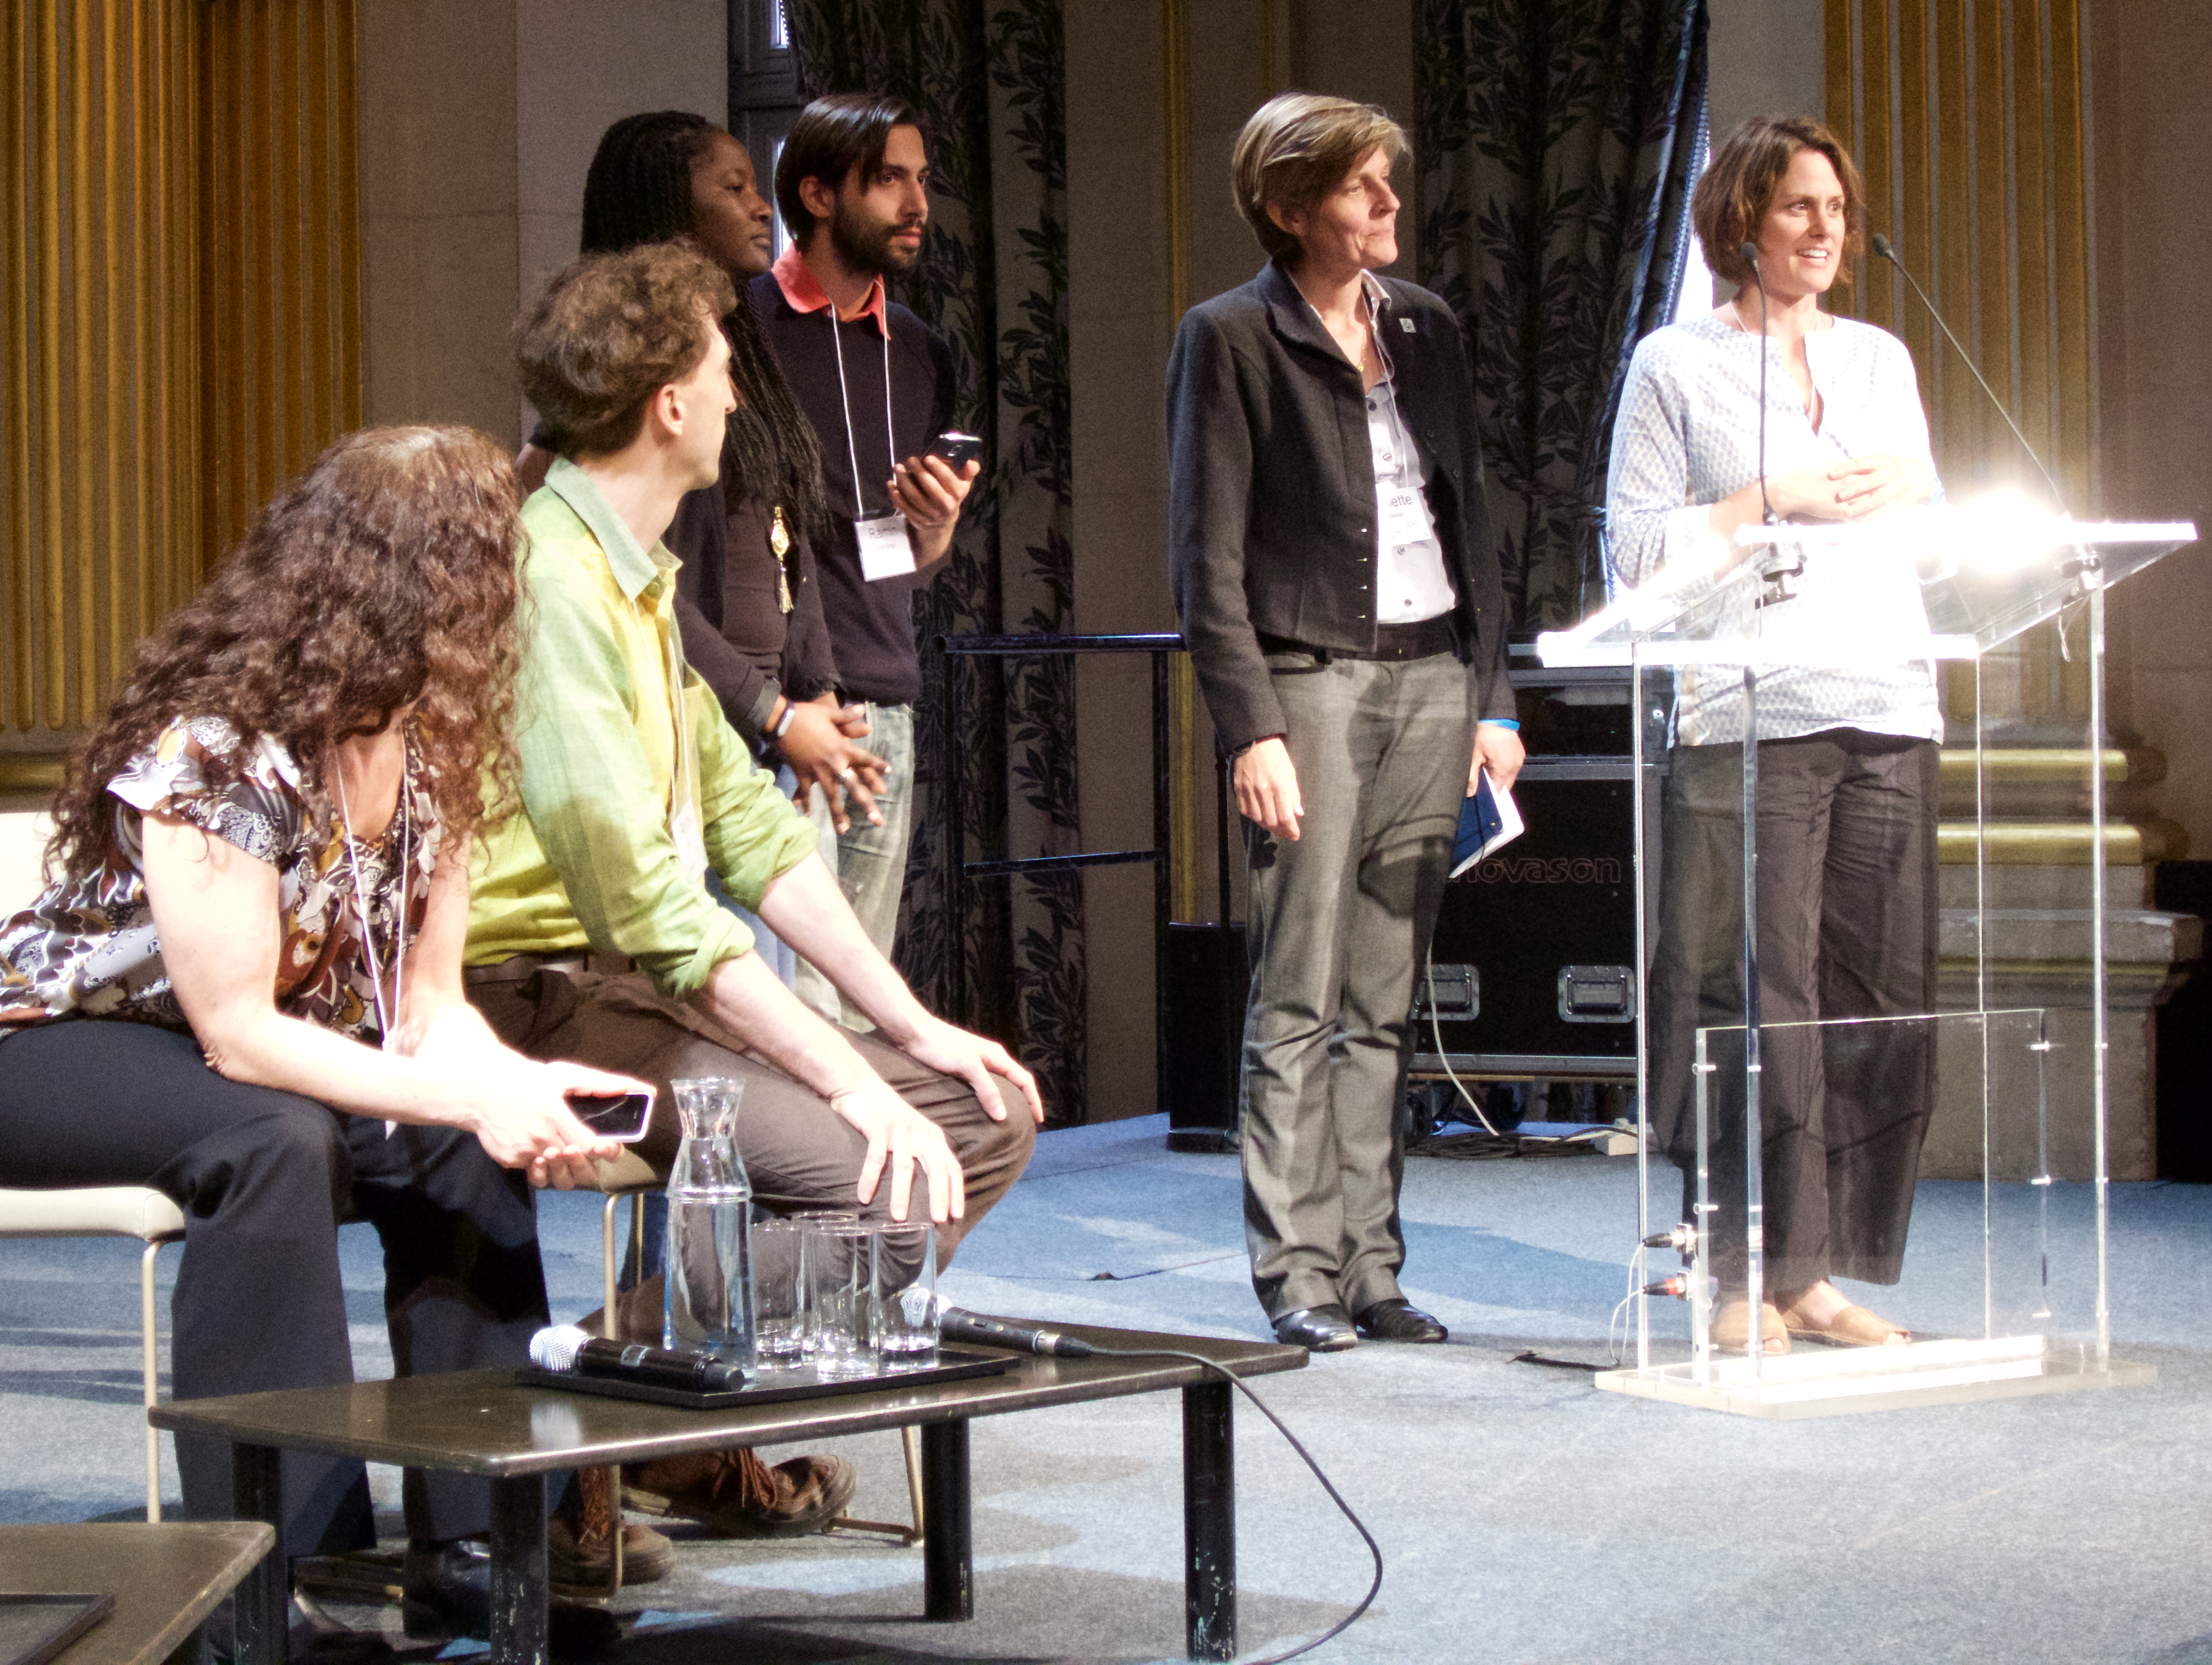 At the Hôtel de Ville, presenting ideas for healing the city of Paris at the Paris Sage Assembly, April 17, 2015.  From left: Jessie Tenenbaum, Arno Klein, A representative from the city, Ramin Farhangi, Annette Bakker, and Amy Clark.